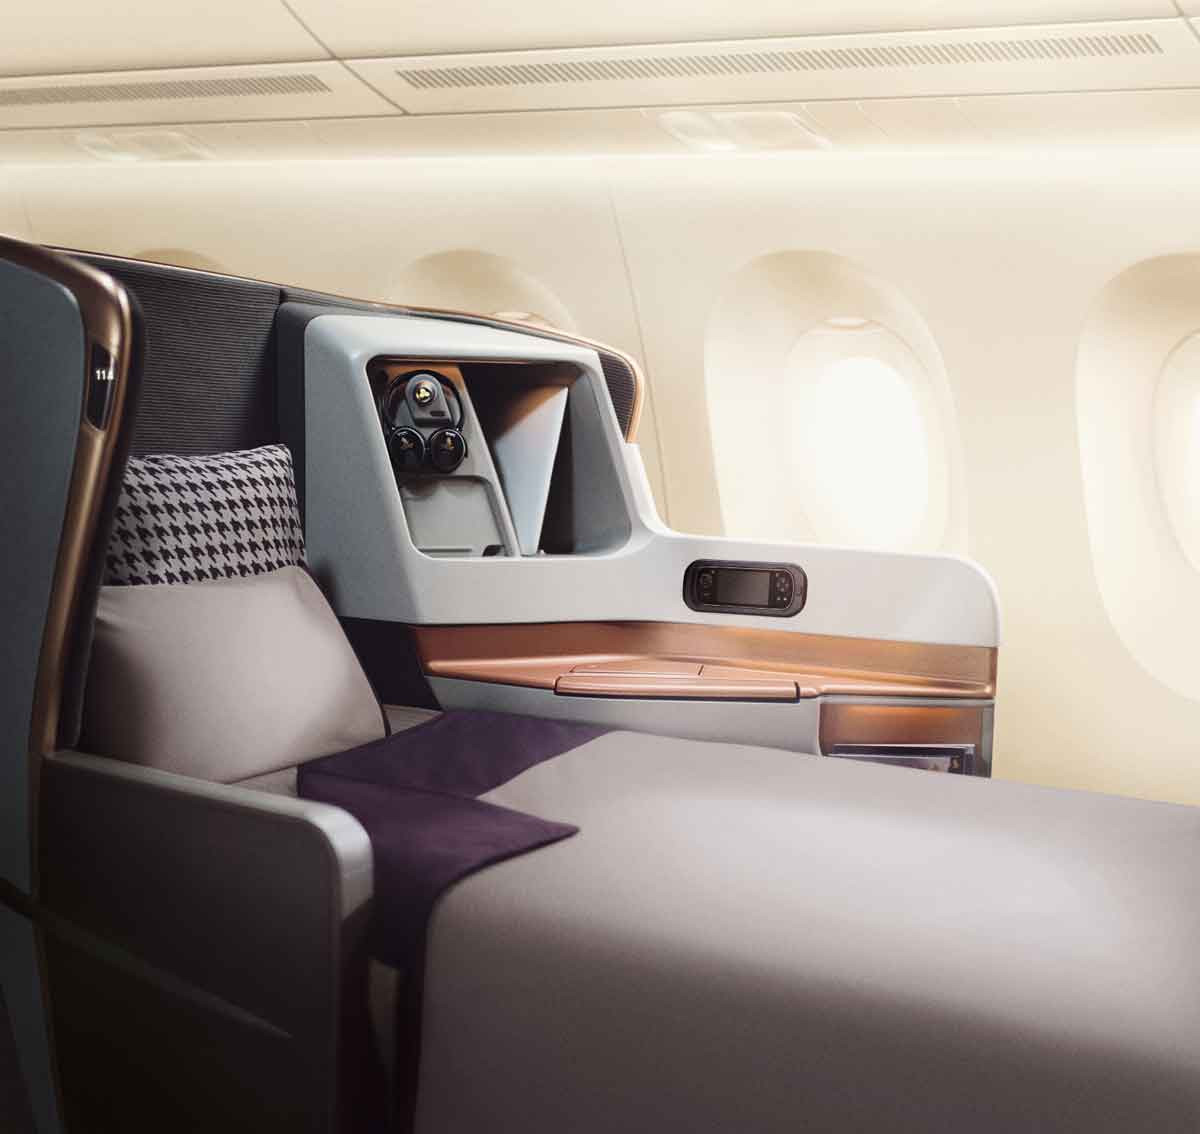 Singapore-Airlines-A350-900ULR-Business-Class-Seat.jpg